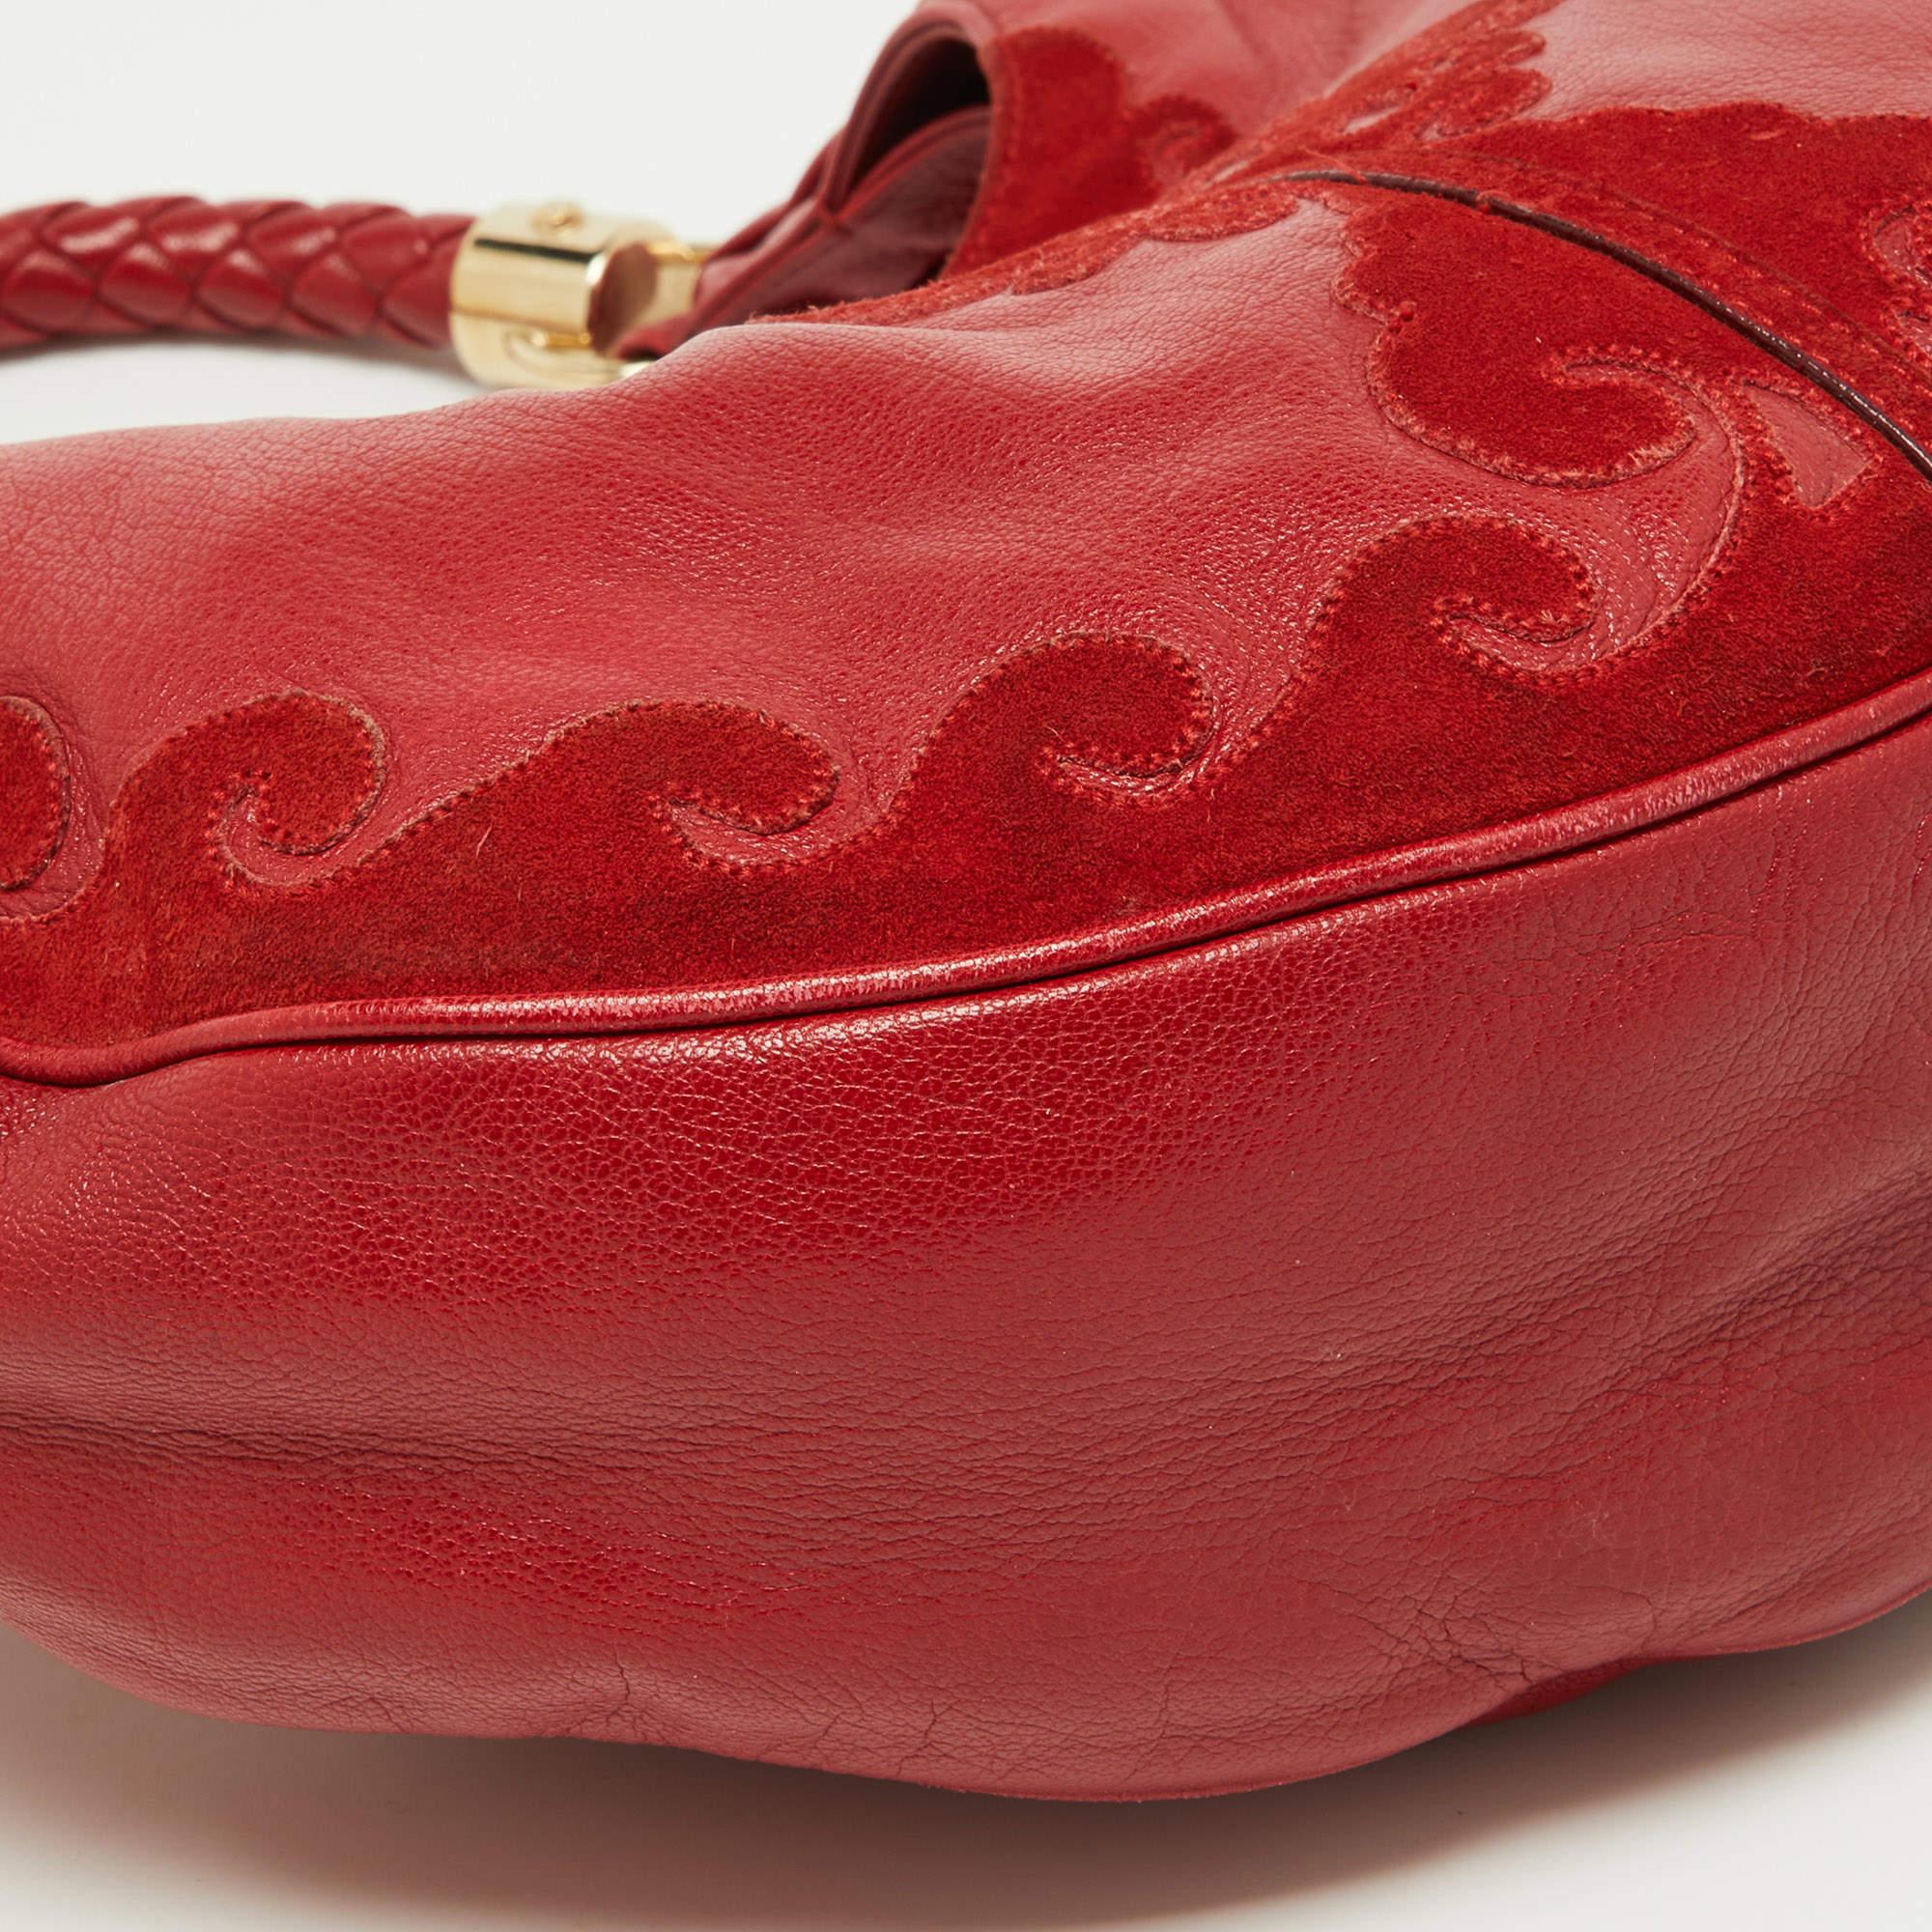 Yves Saint Laurent Red Suede and Leather Trim Tassel Hobo 3